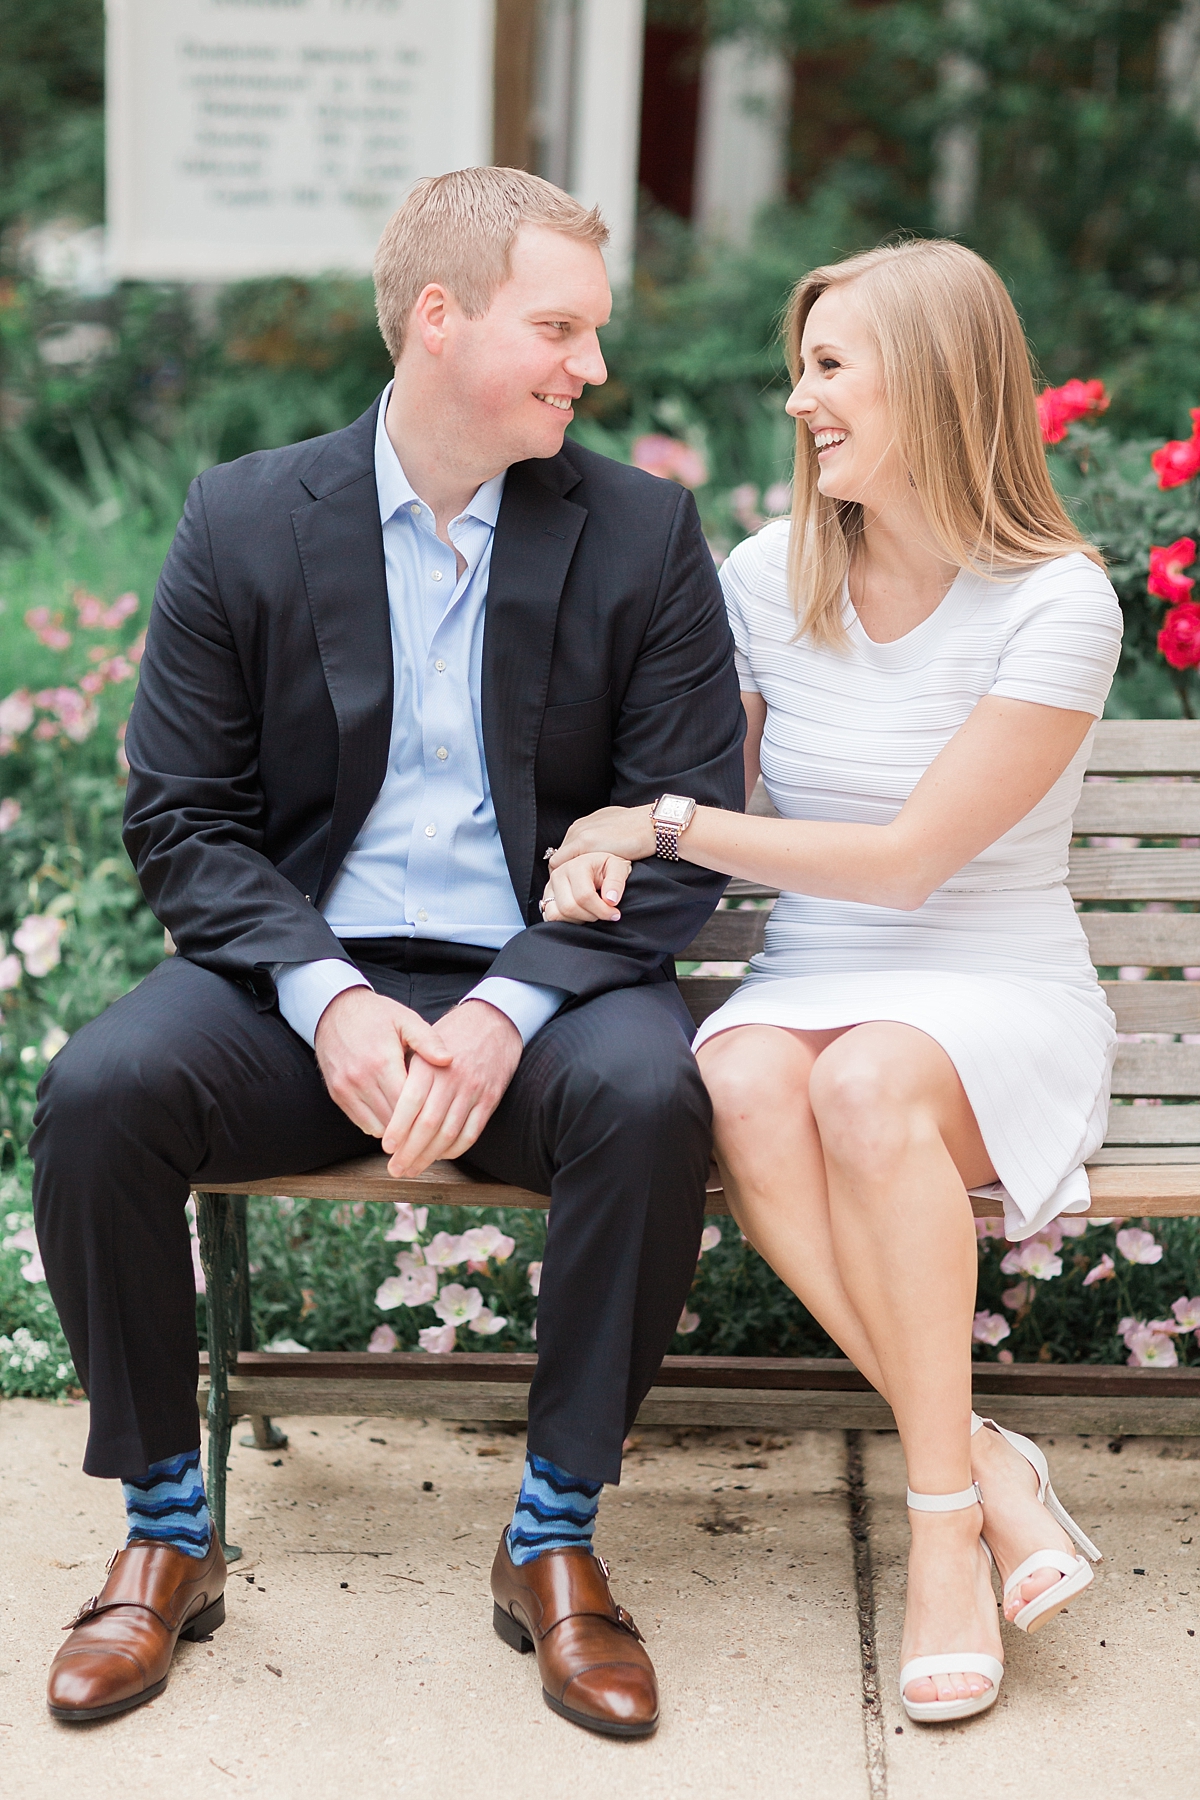 A romantic Georgetown engagement session full of colorful florals along the waterfront photographed by Washington, DC wedding photographer, Alicia Lacey.